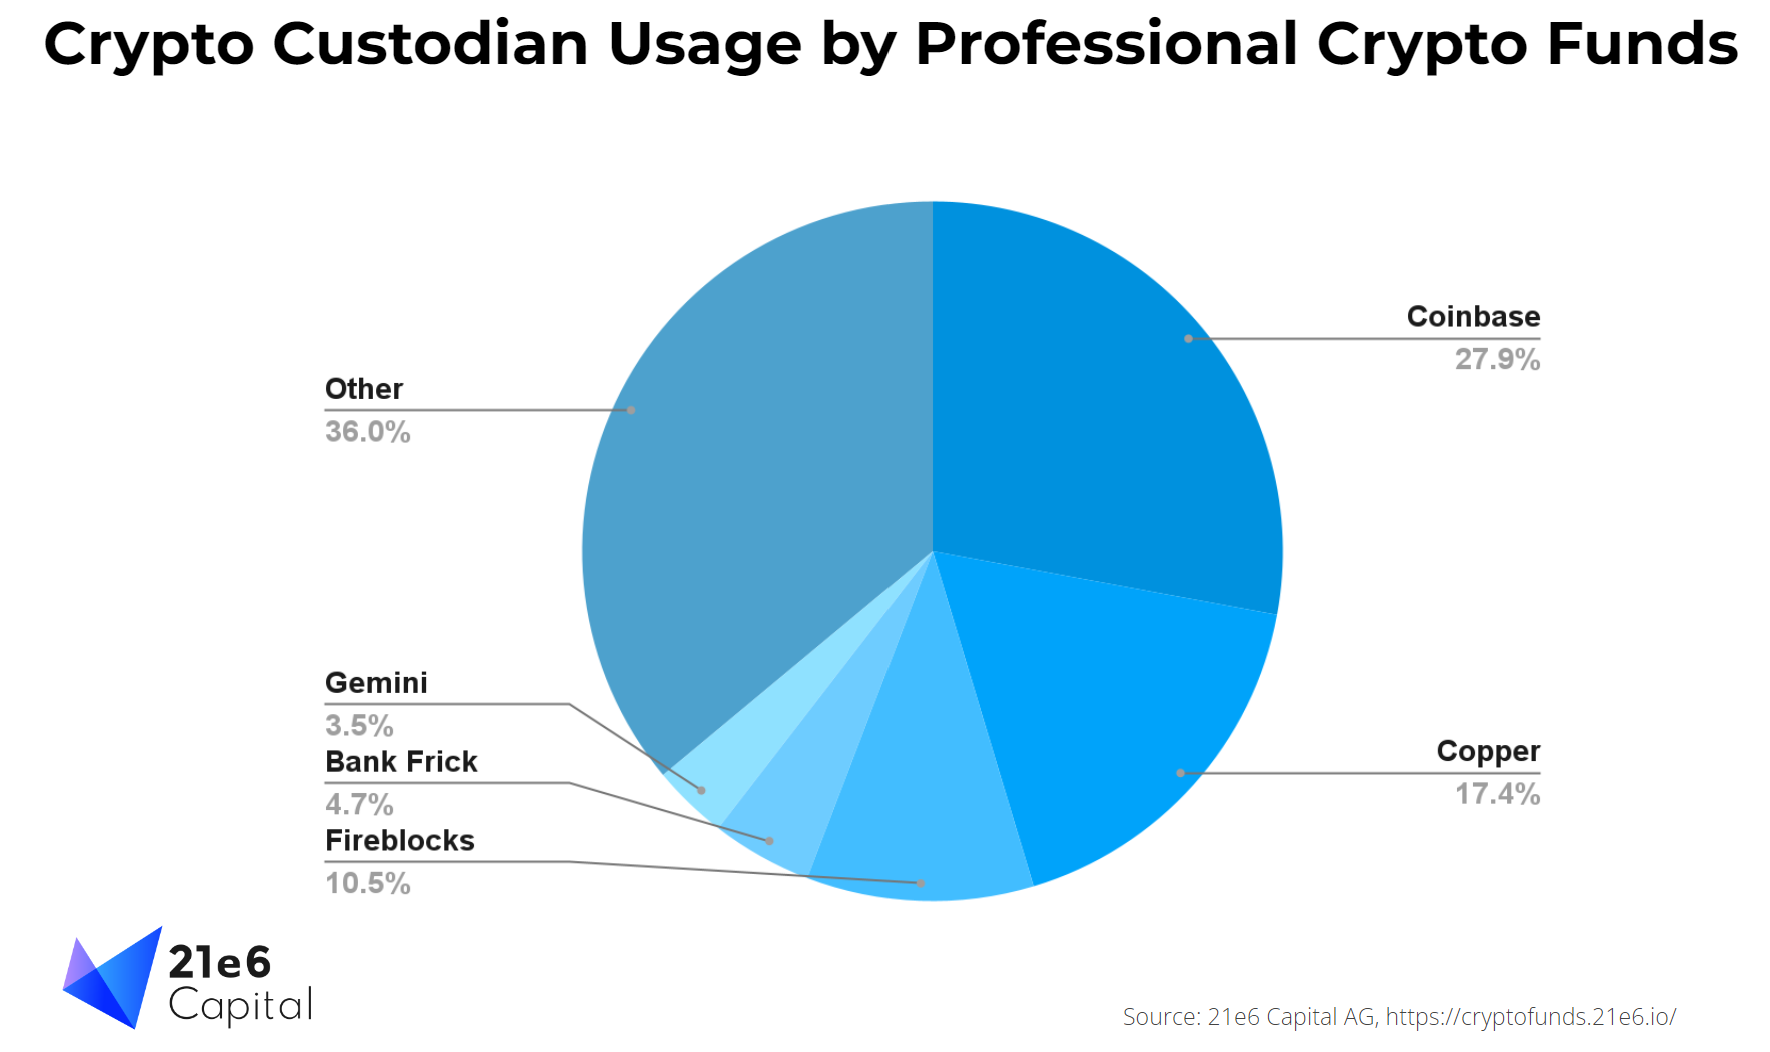 Top Crypto Custodians for Crypto Funds